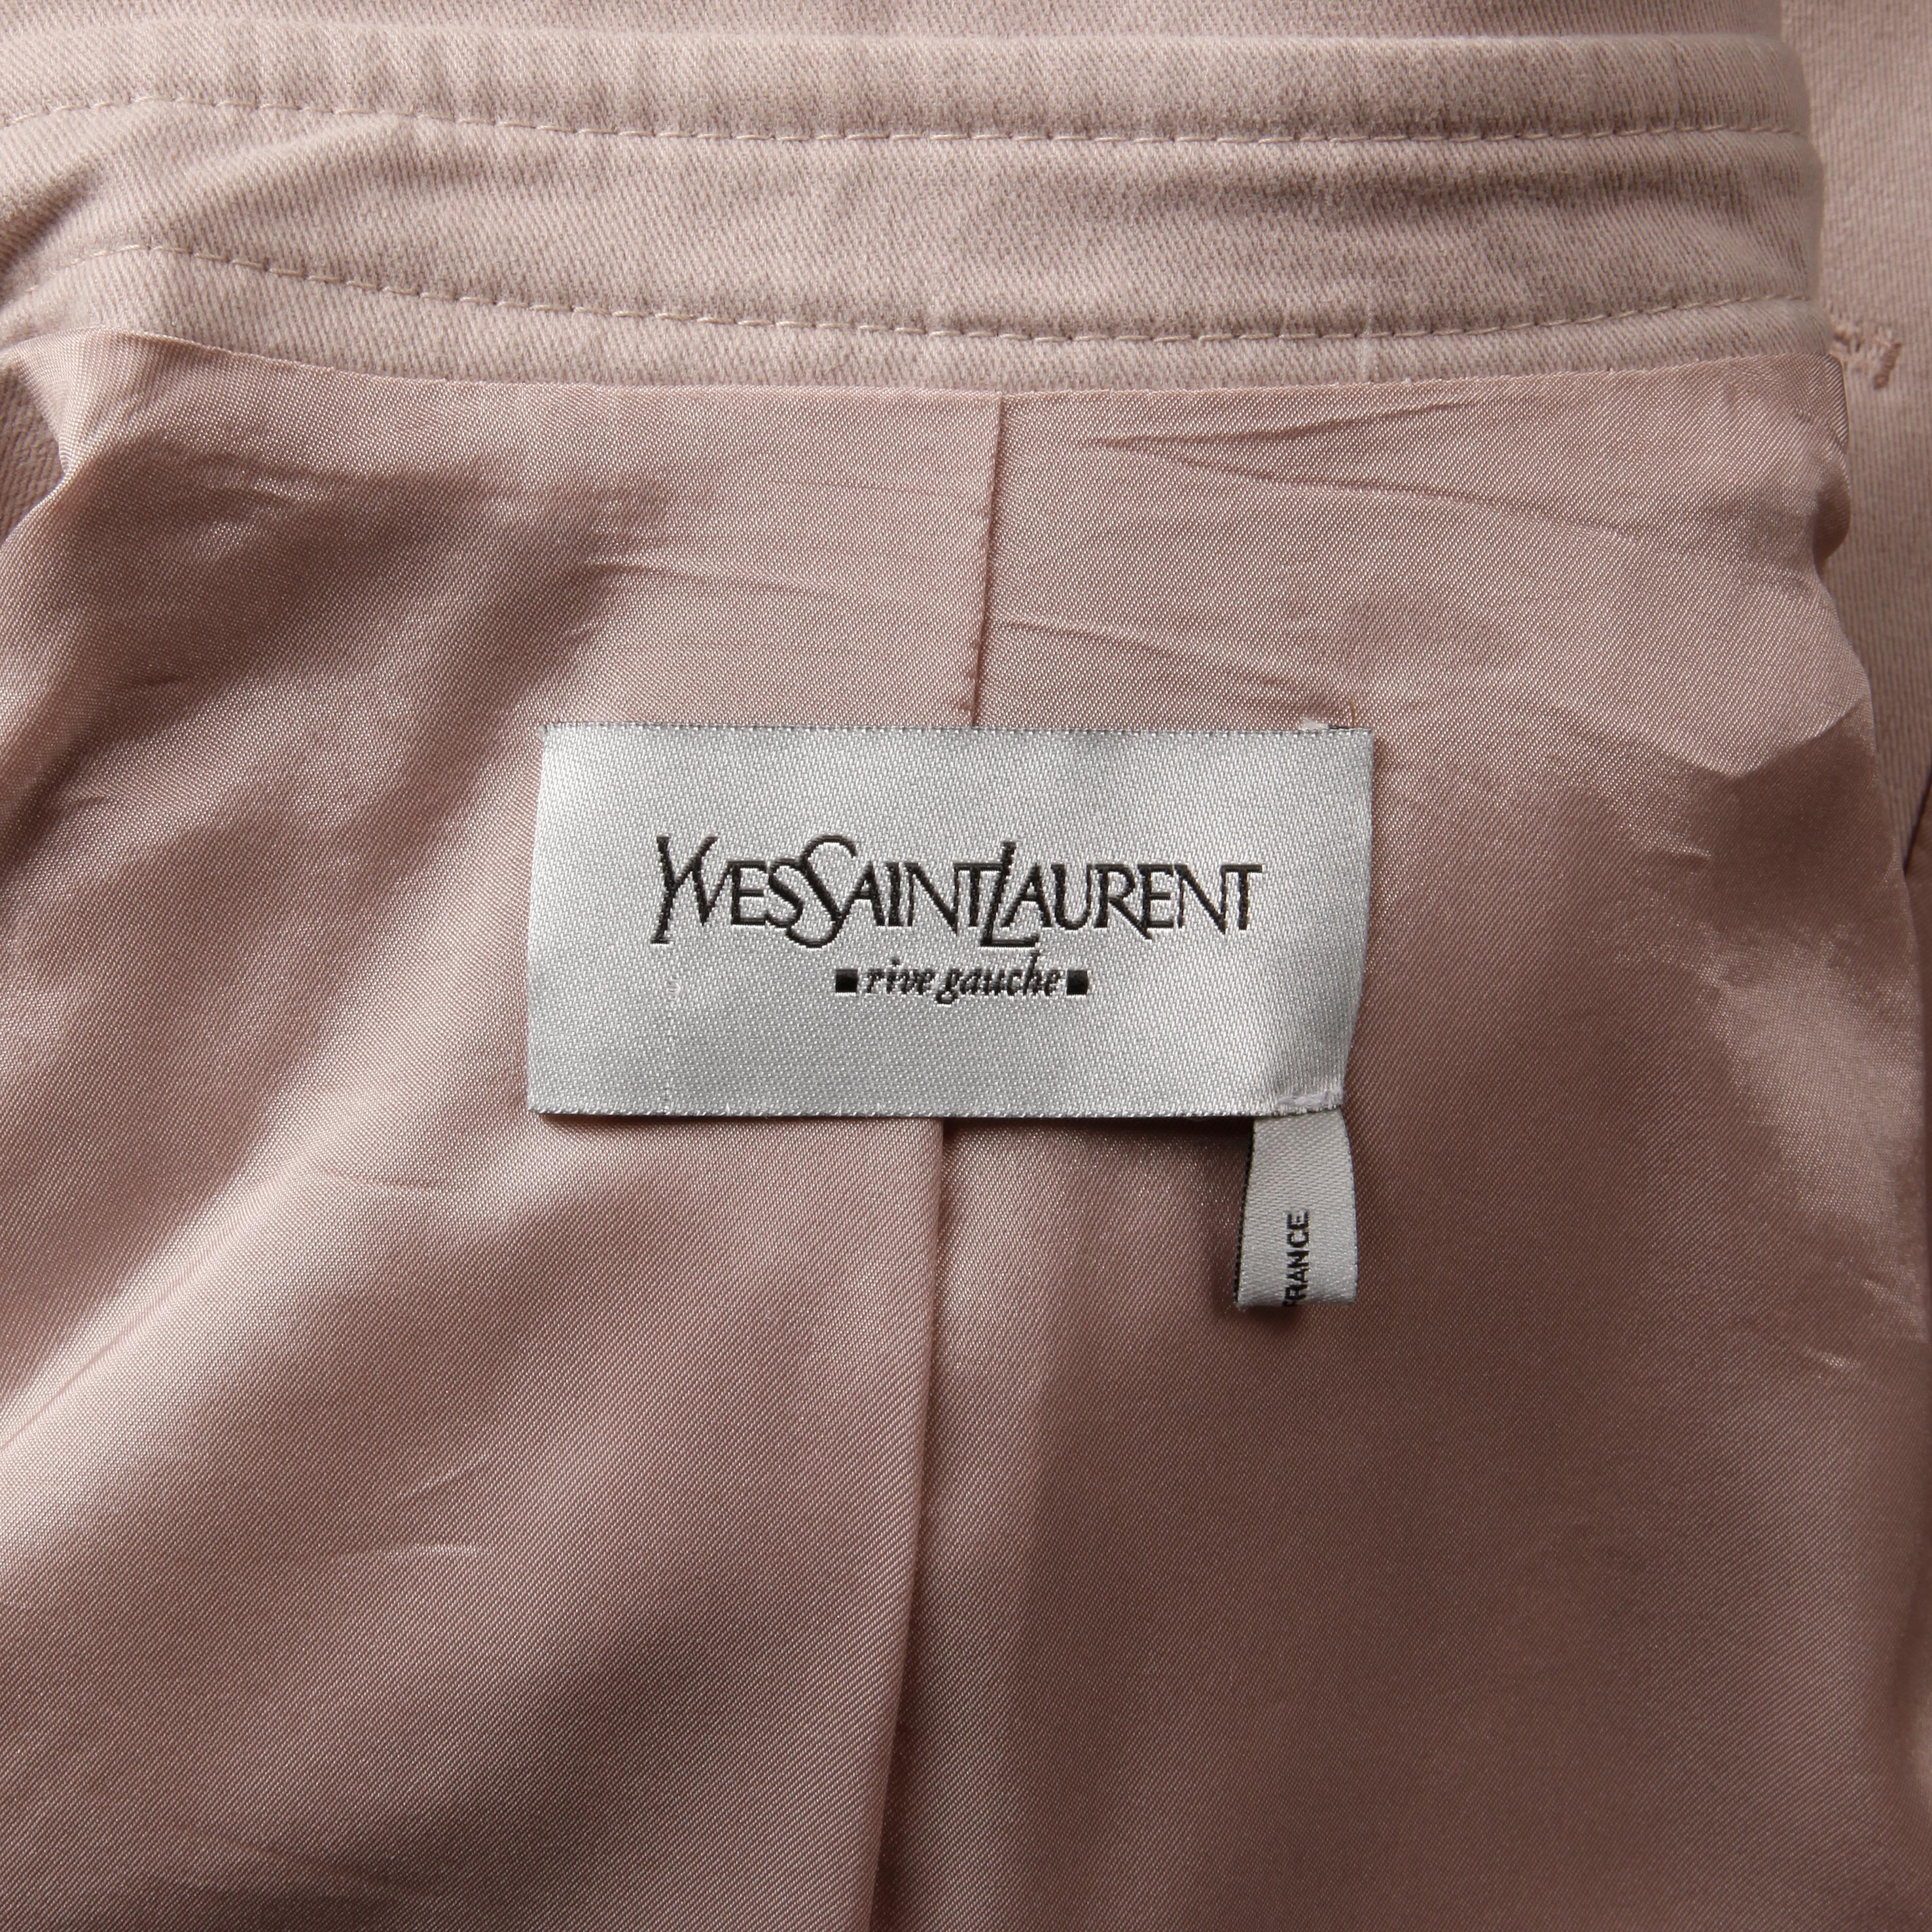 Iconic and collectible 2003 Tom Ford for Yves Saint Laurent Rive Gauche pink jacket and skirt ensemble with asymmetric ruffle. The skirt is fully lined with front button, buckle and two-way zipper closure (you may unzip from the bottom up to create